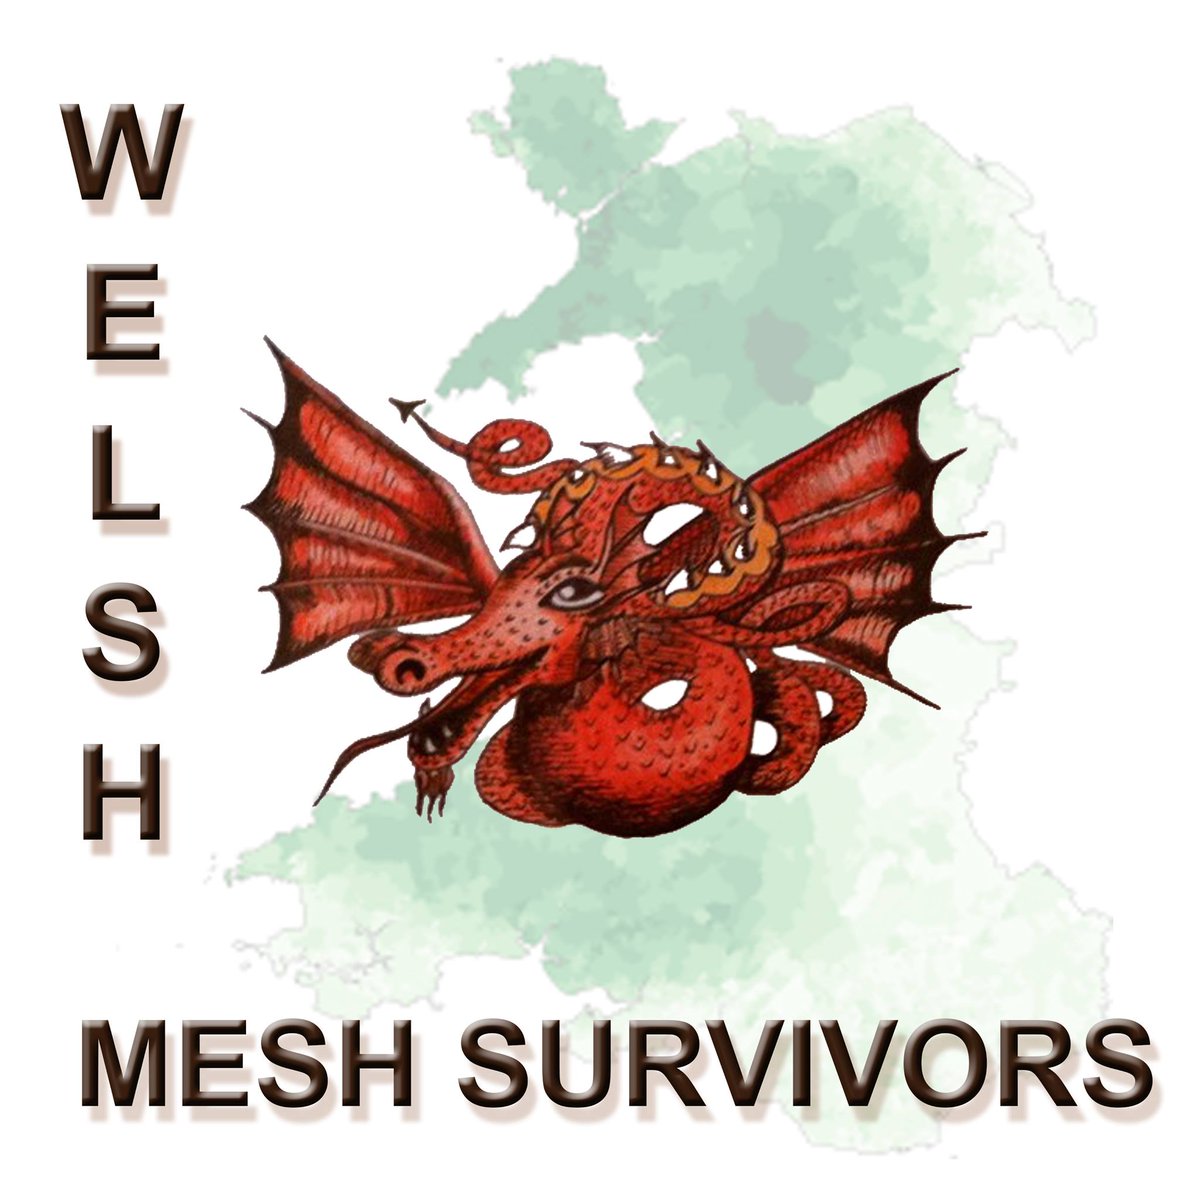 @ptsafetylearn @shartles1 @MeshCampaign @RectopexyS @IrelandMesh @MBLacey @MeshUKCT @MeshAwarenessAU @meshsurvivorire A really good paper which highlights most aspects of this #Mesh Global Medical Health Disaster.
Many thanks, Sharon.